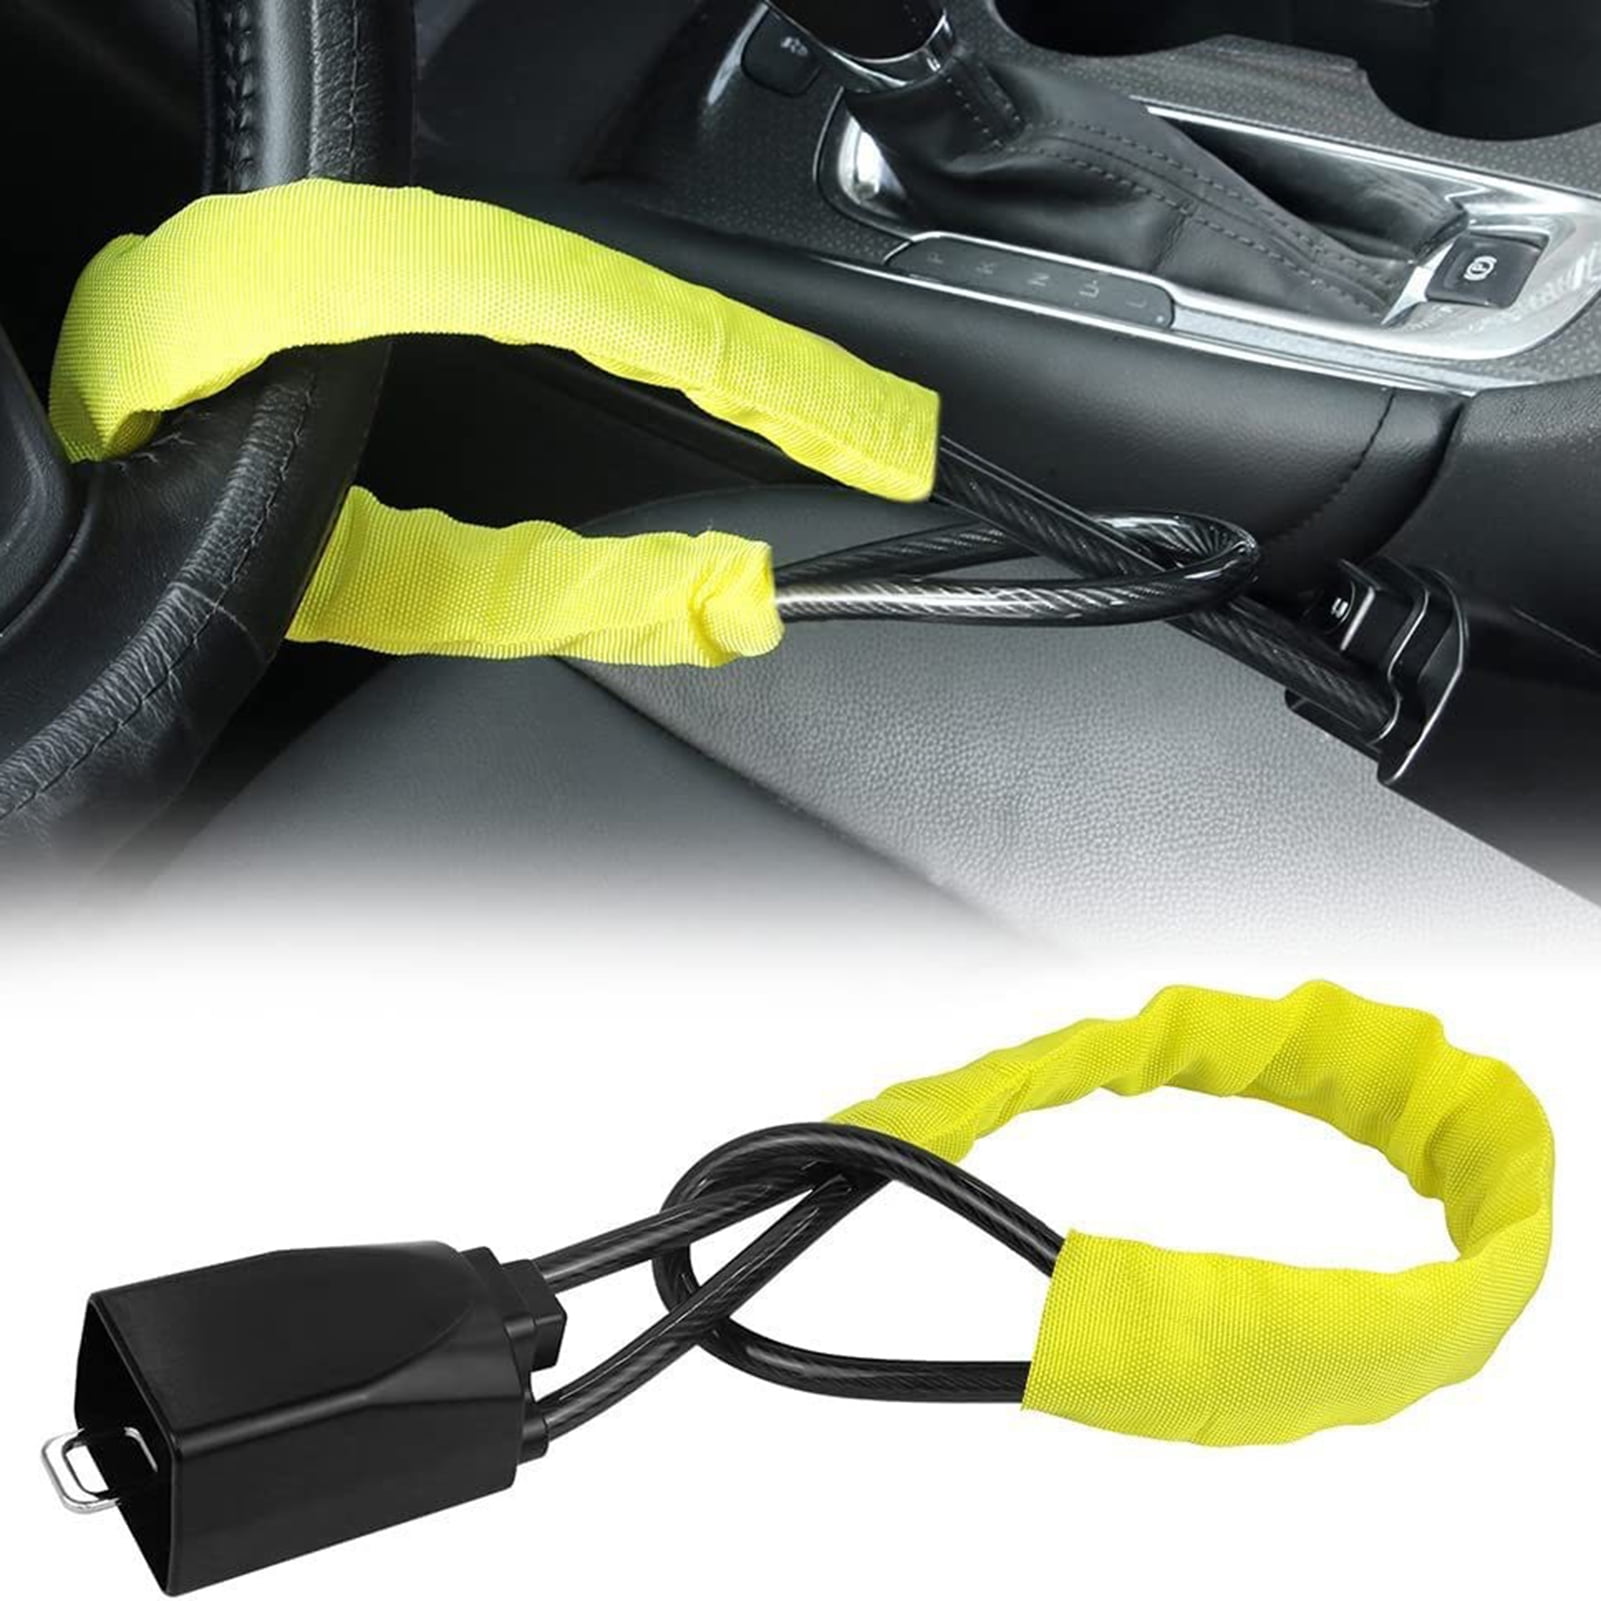 Car Steering Wheel Security Lock With 3 Keys Vehicle Anti Theft Devices  Foldable